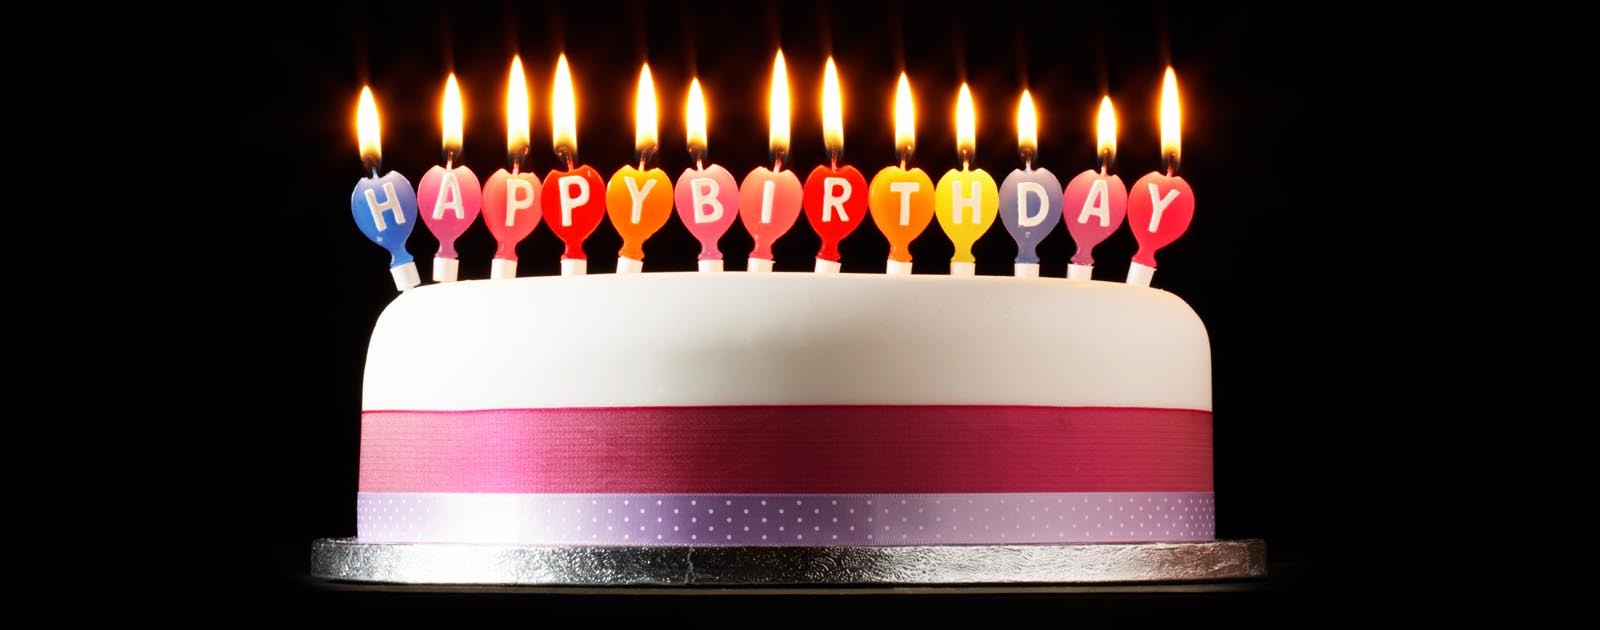 Image Of Birthday Cake With Candles wallpapers - High quality ...